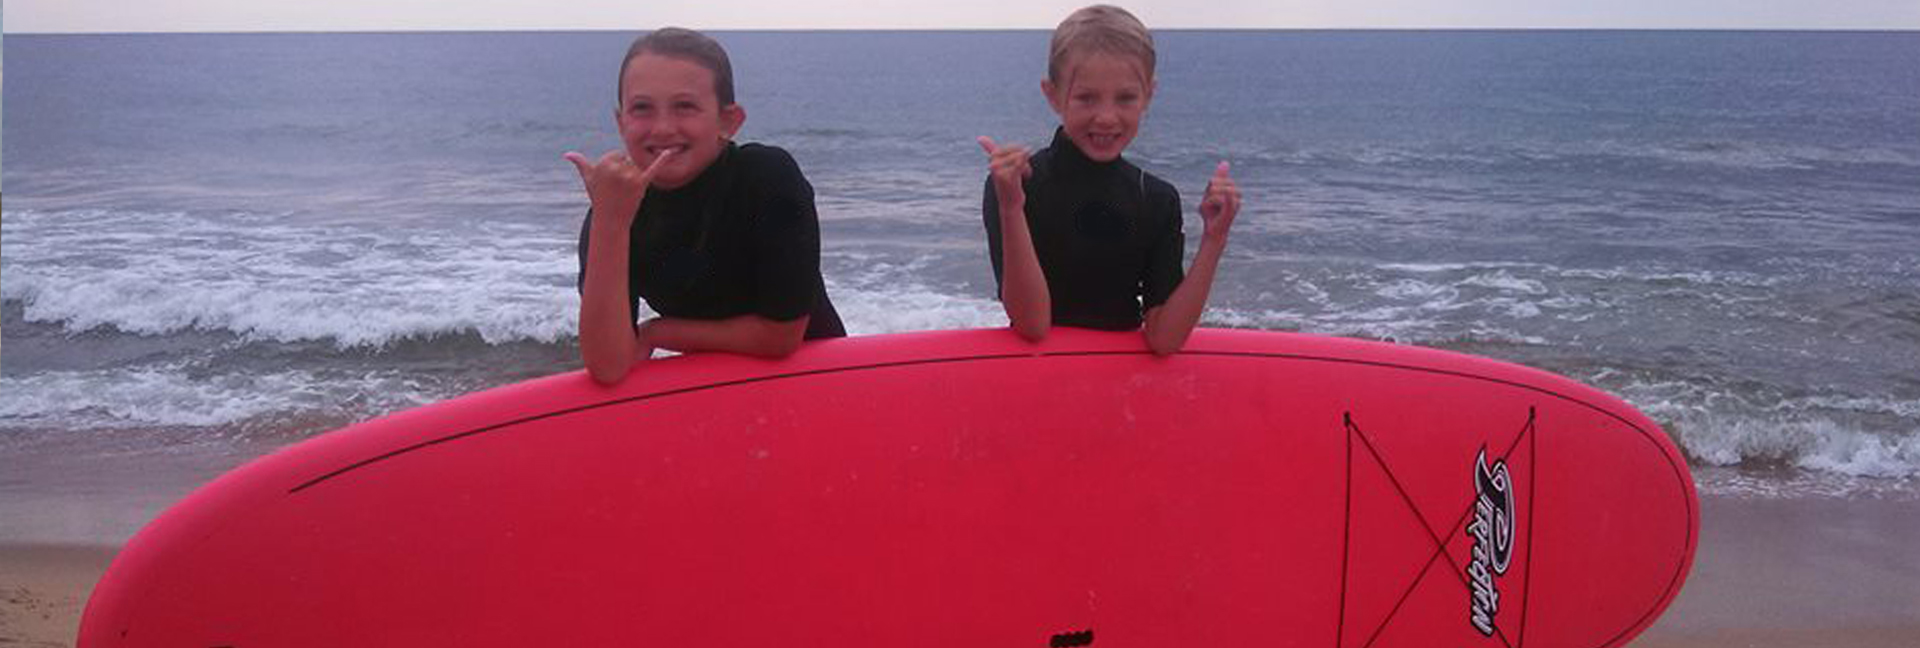 boy and girl pose behind a red surboard with a thumbs up